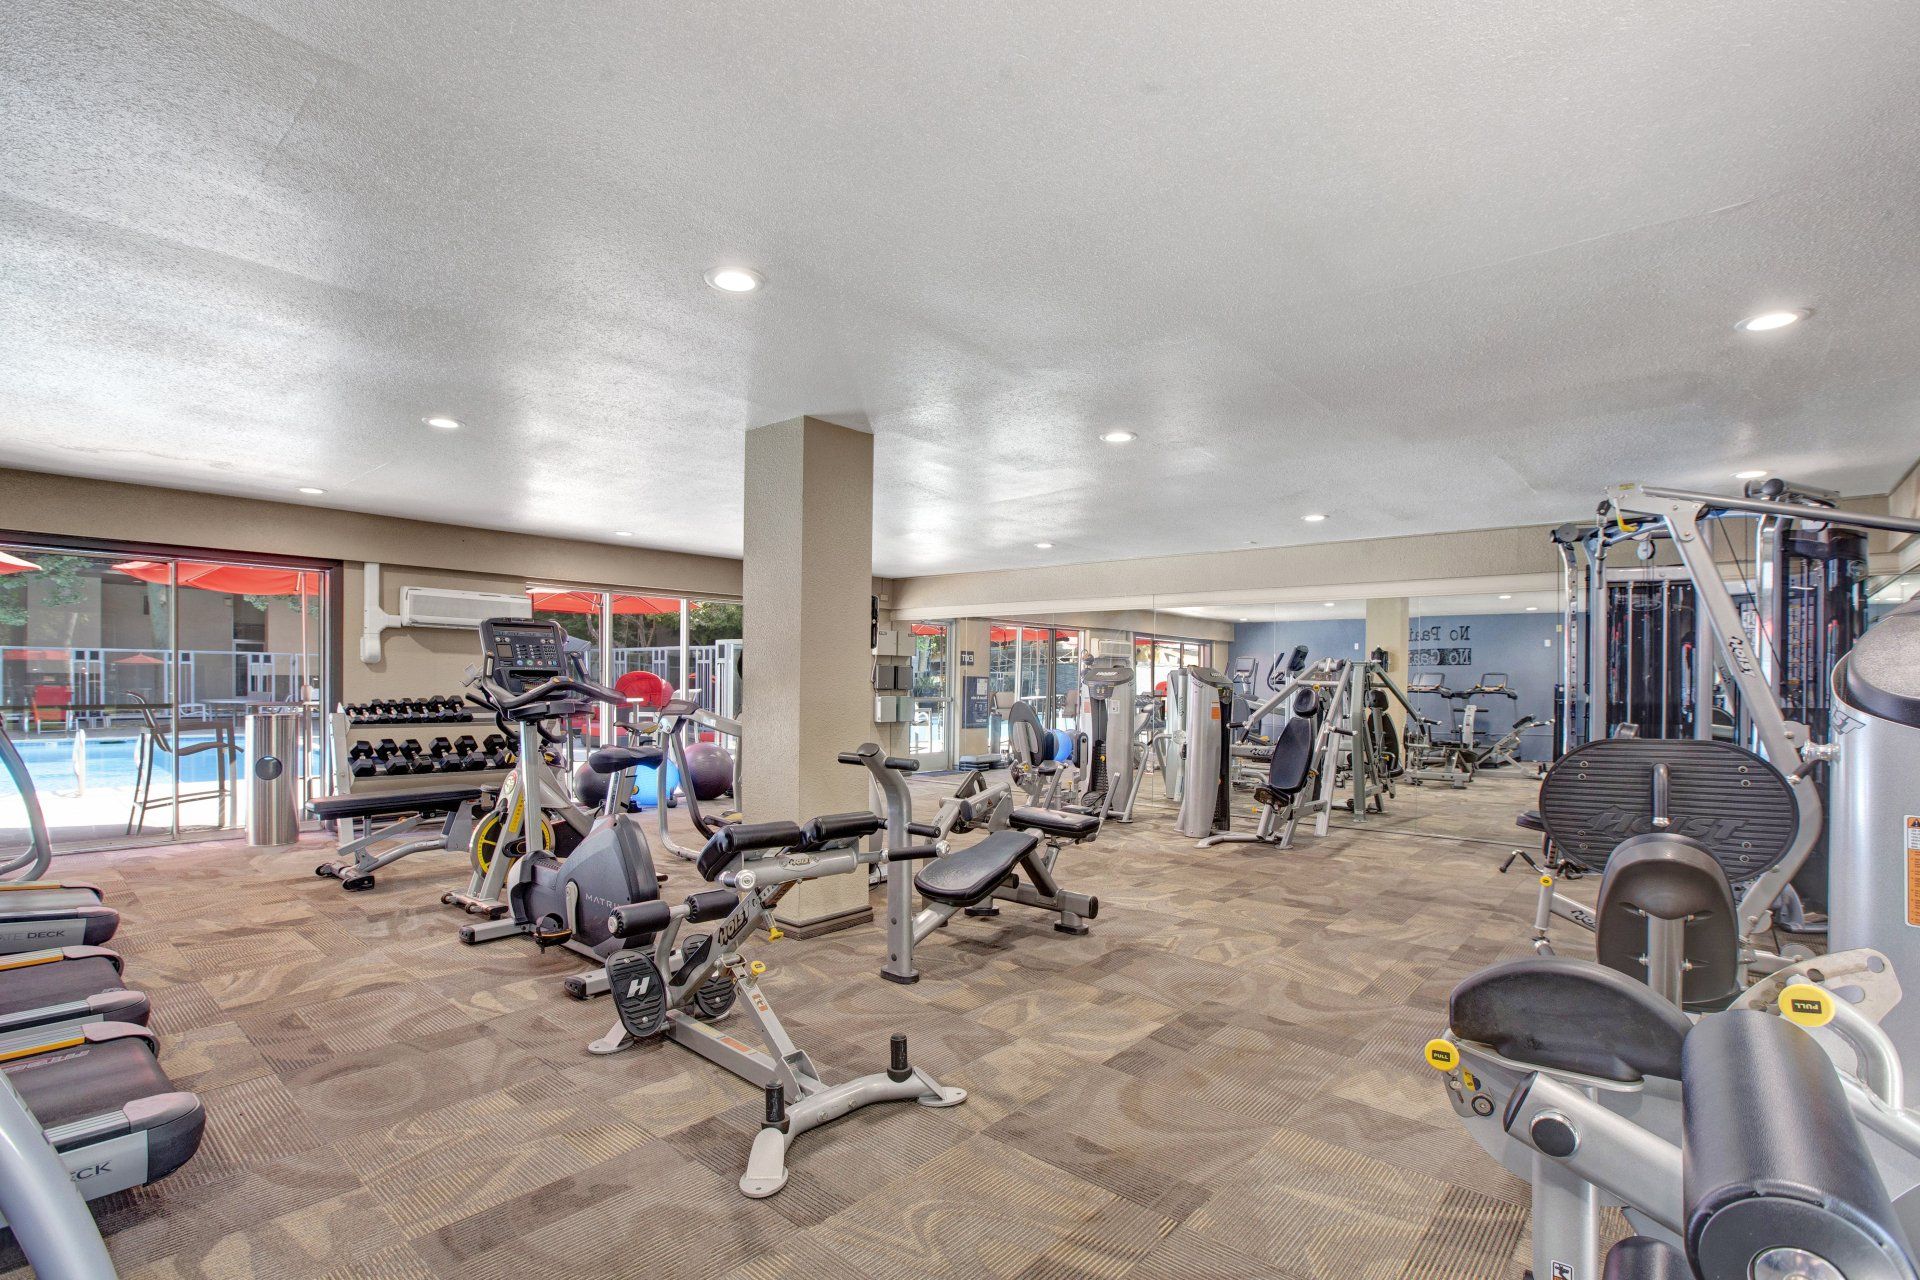 A large gym filled with lots of exercise equipment at Capitol Towers.